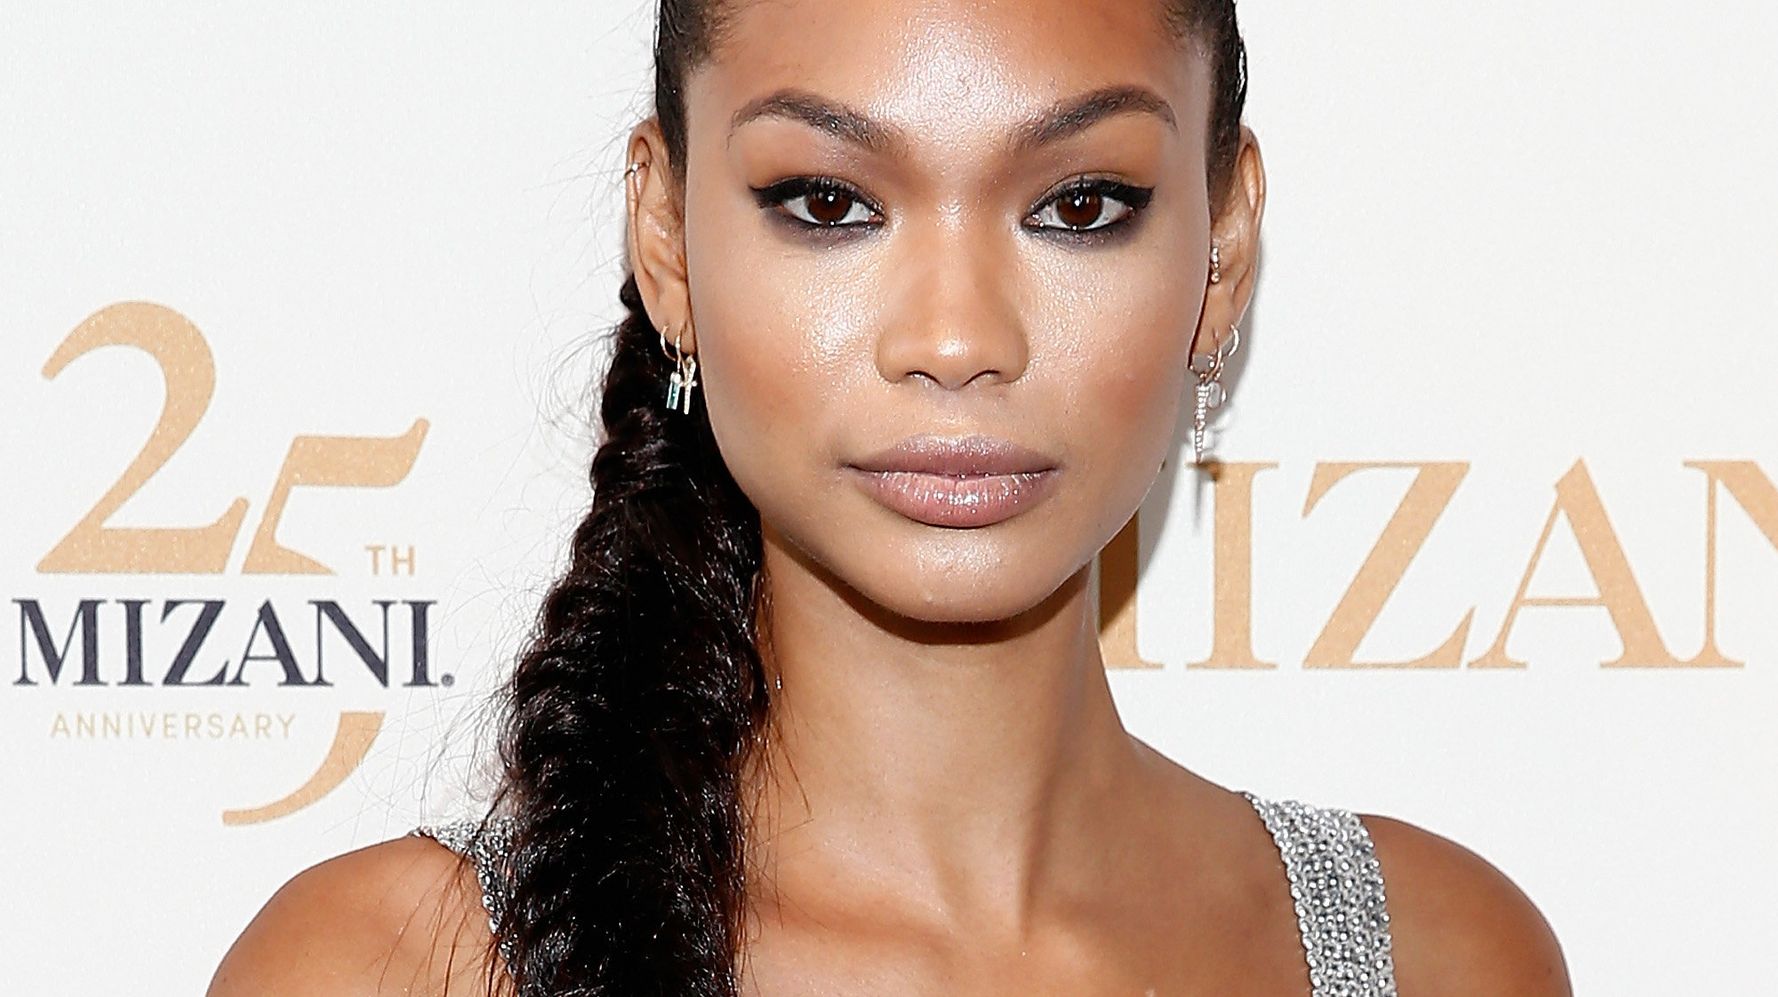 Chanel Iman Gets Real About Fashion's Diversity Problem